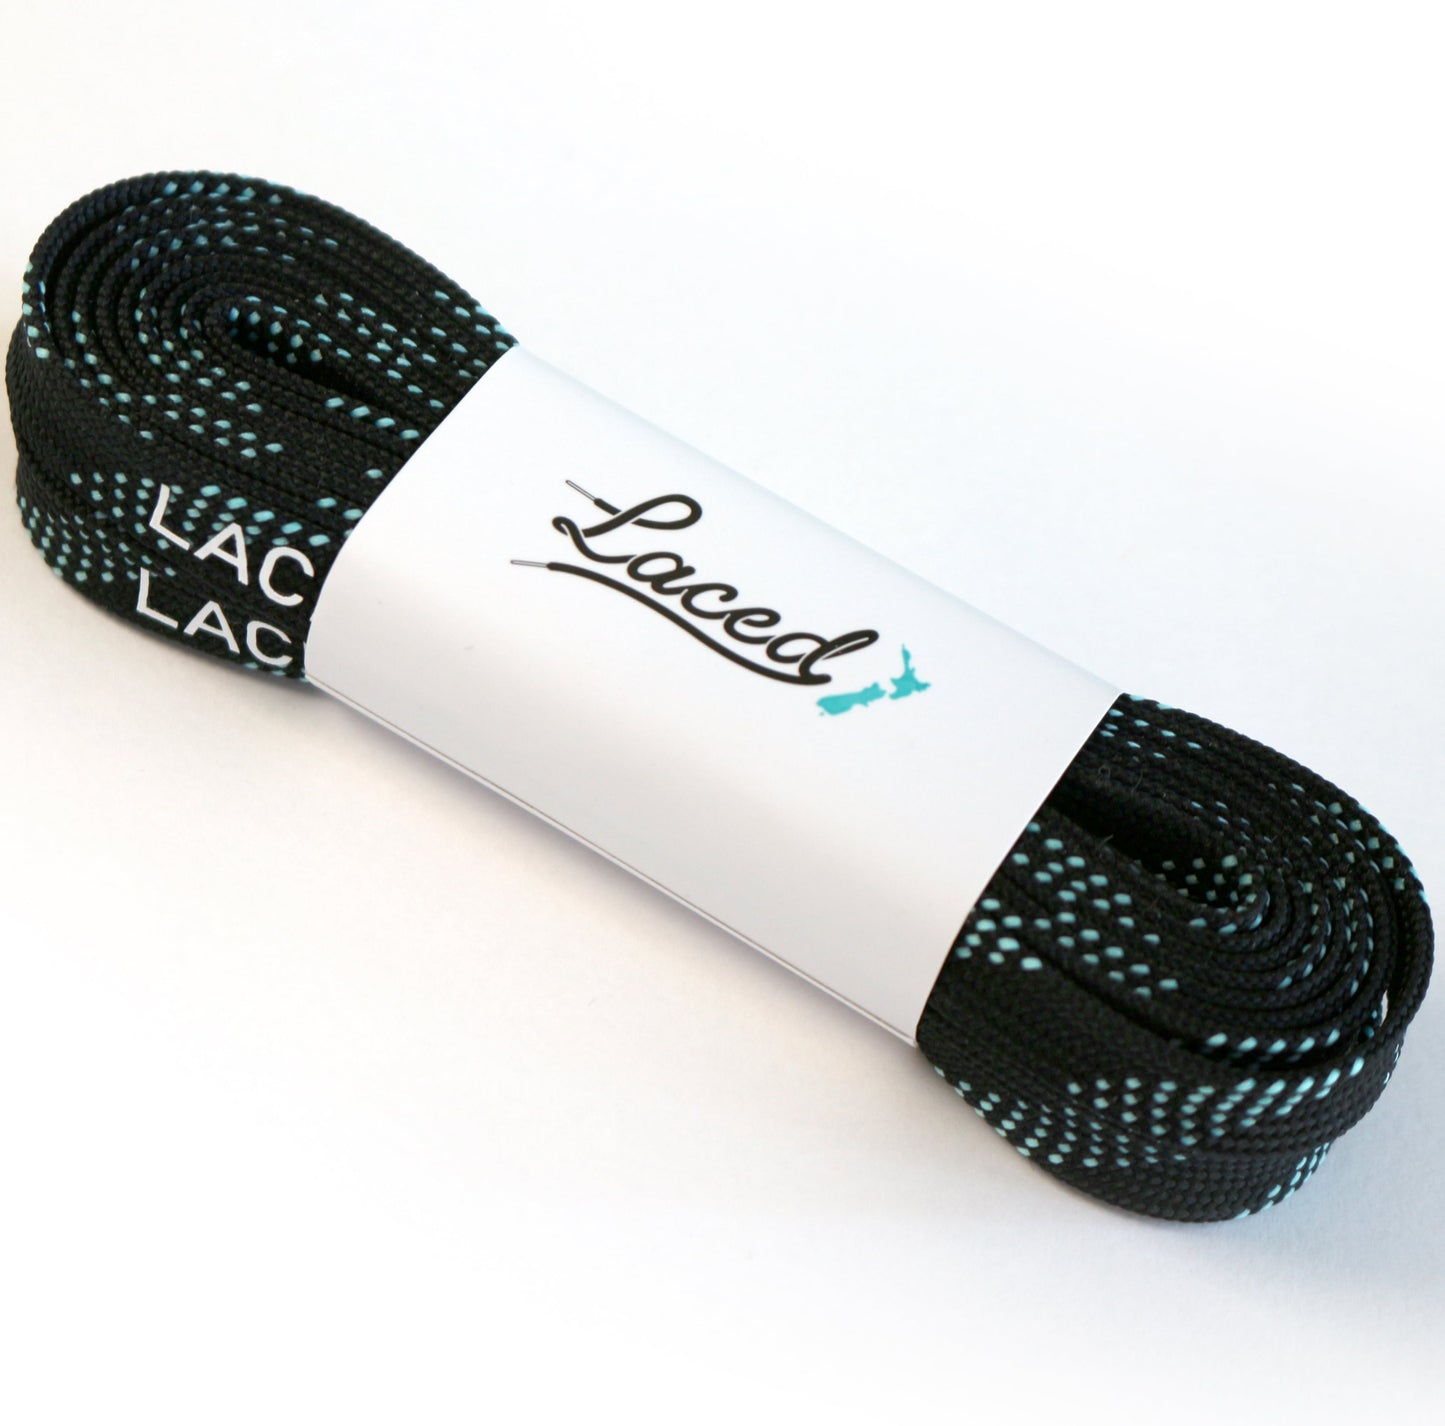 Laced Waxed Laces product photo. Black laces with mint coloured dots.